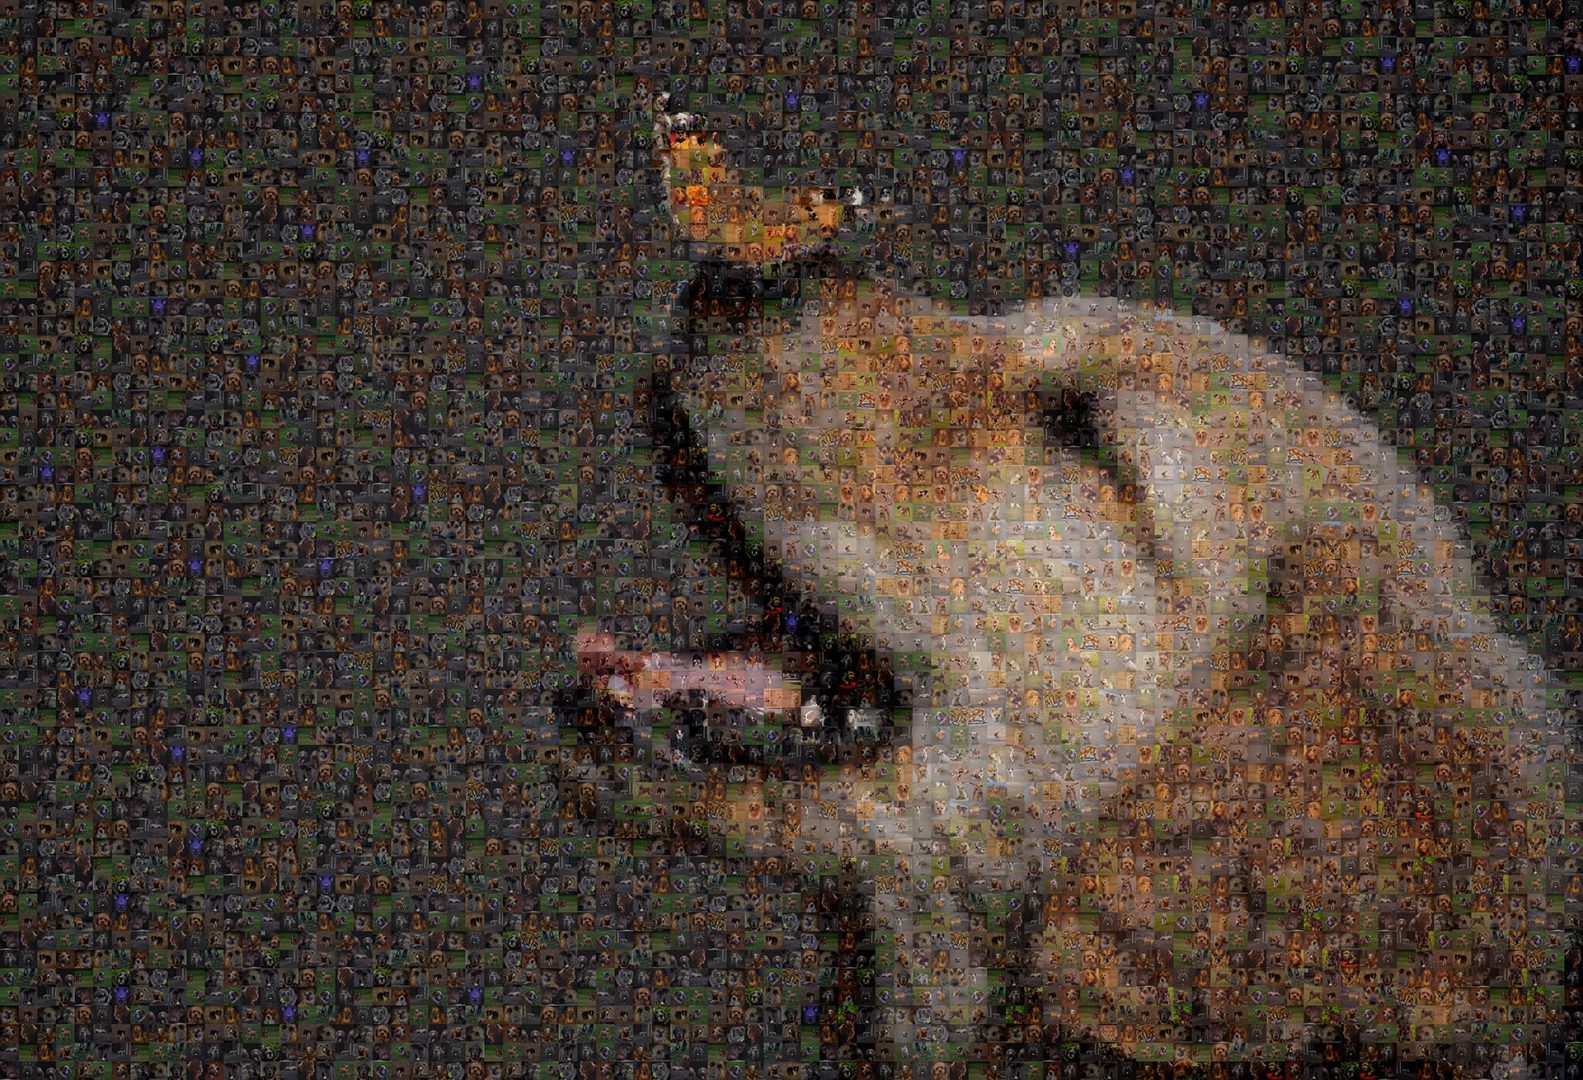 Dog with Butterfly